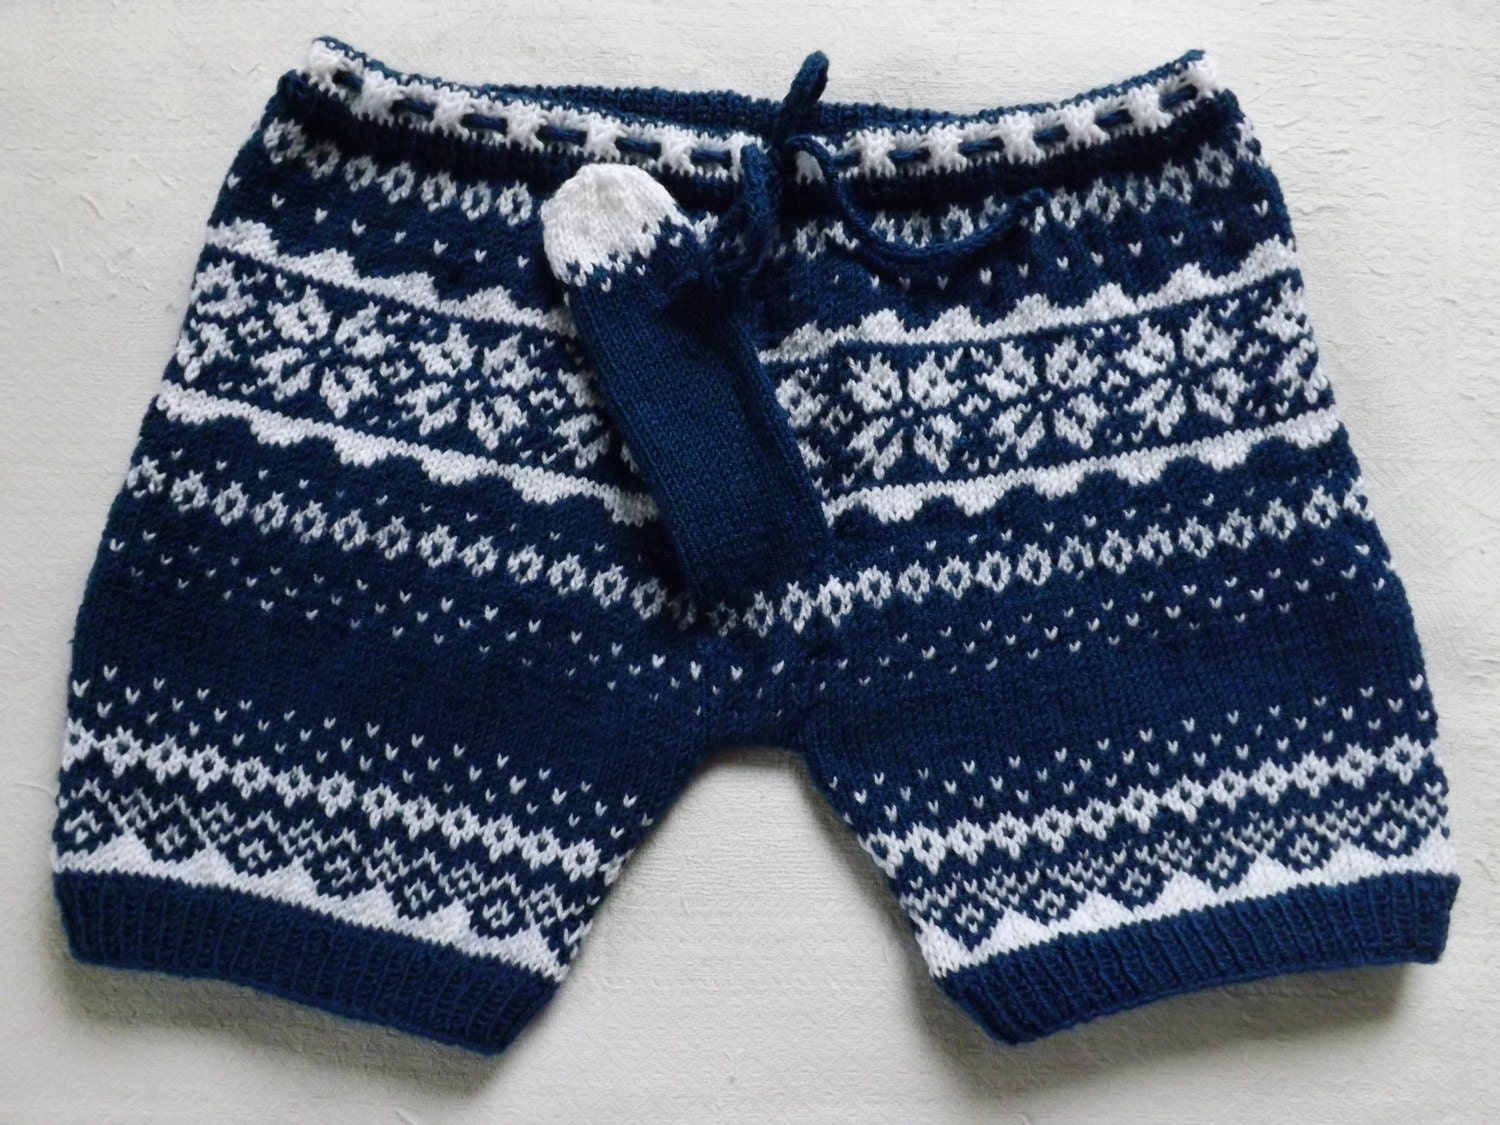 WarmPresents sells sexy knitted underwear for men and it's a bit scary